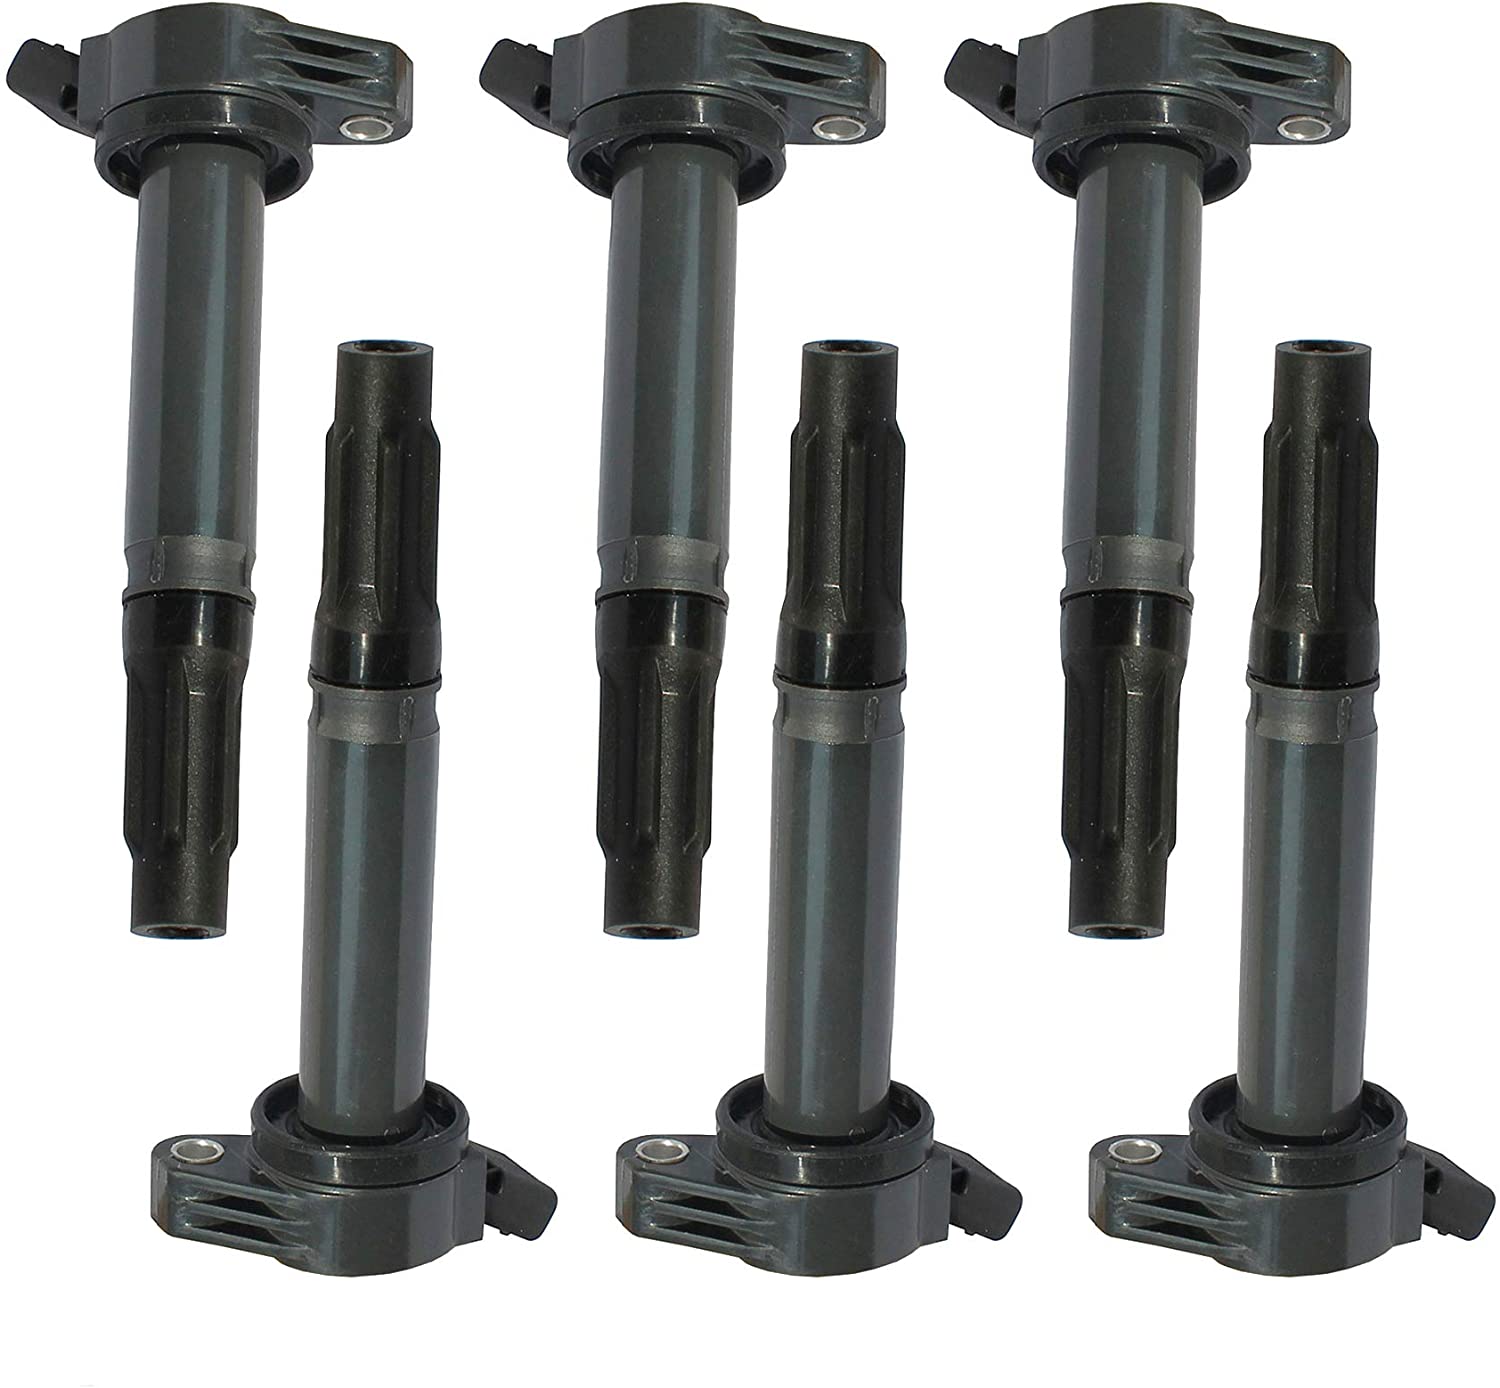 DEAL Pack of 6 New Ignition Coils For Toyota Camry Avalon RAV4 Sienna Highlander Venza - Lexus ES350 RX350 RX450h 3.5L V6 Replacement# UF487 C1601 2GRFE 2GRFXE